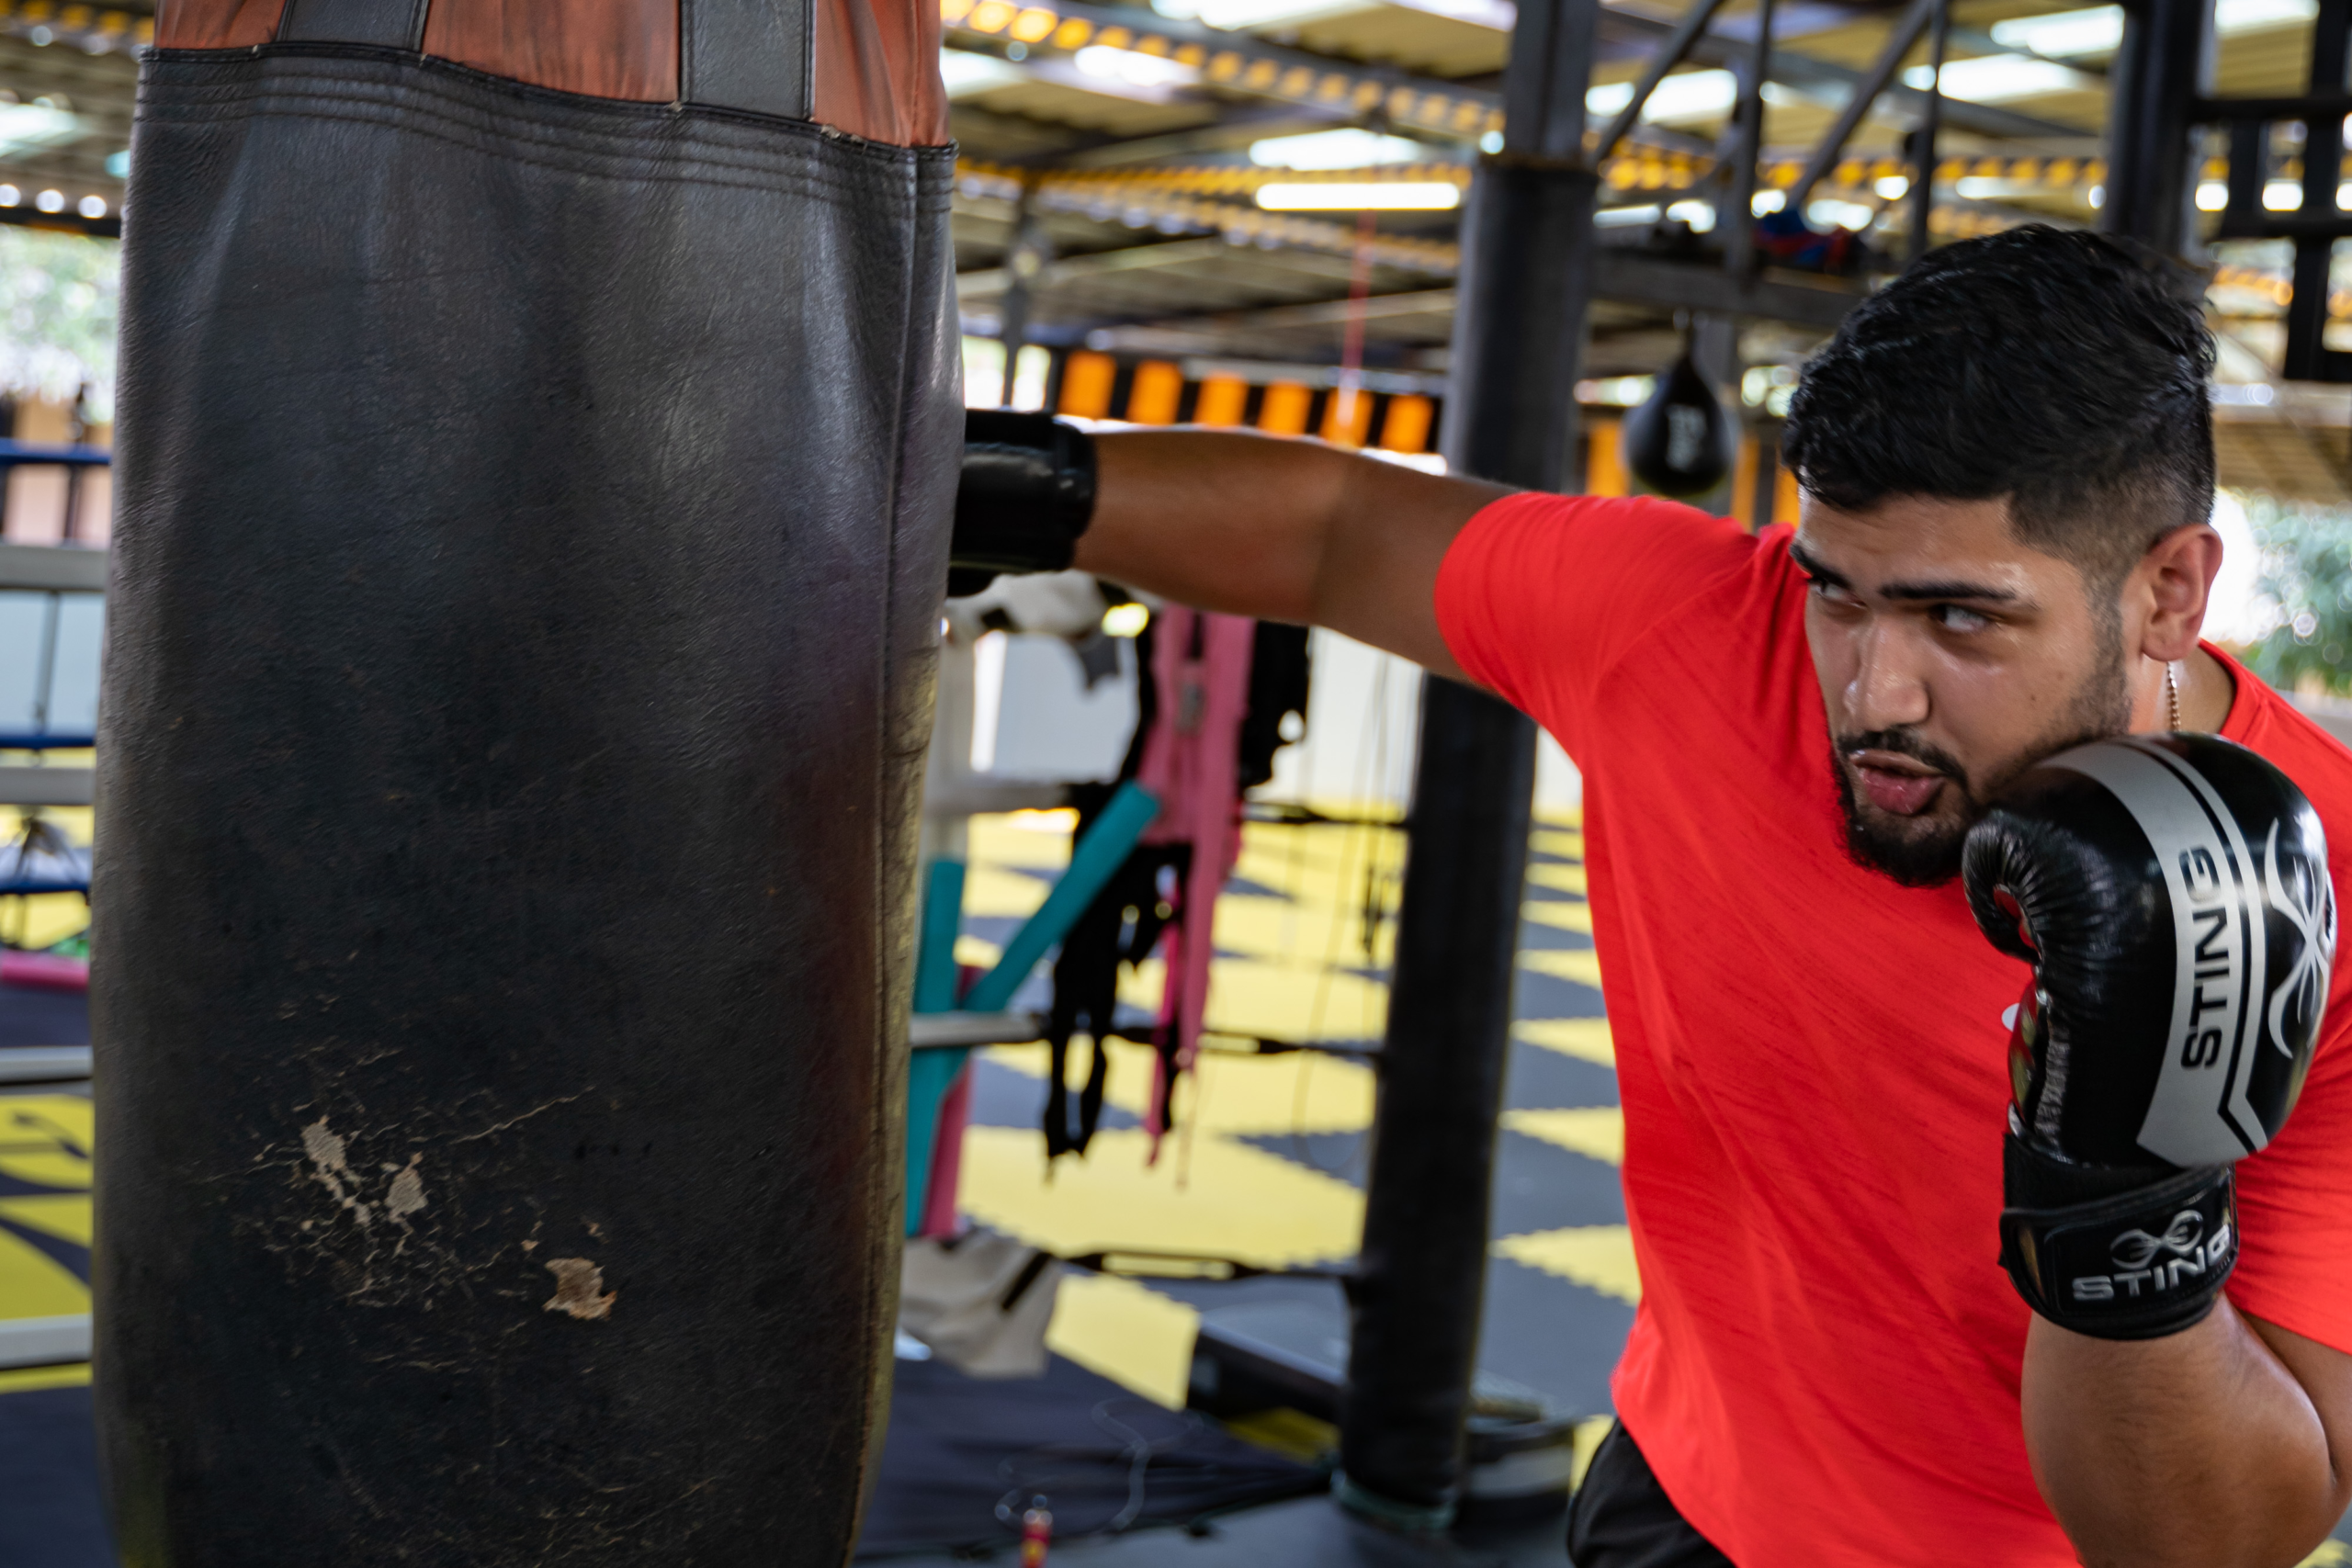 Focused man in a red t-shirt and black boxing gloves practicing a punch on a heavy bag at a self-defense training session, in a gym with visible equipment in the background.